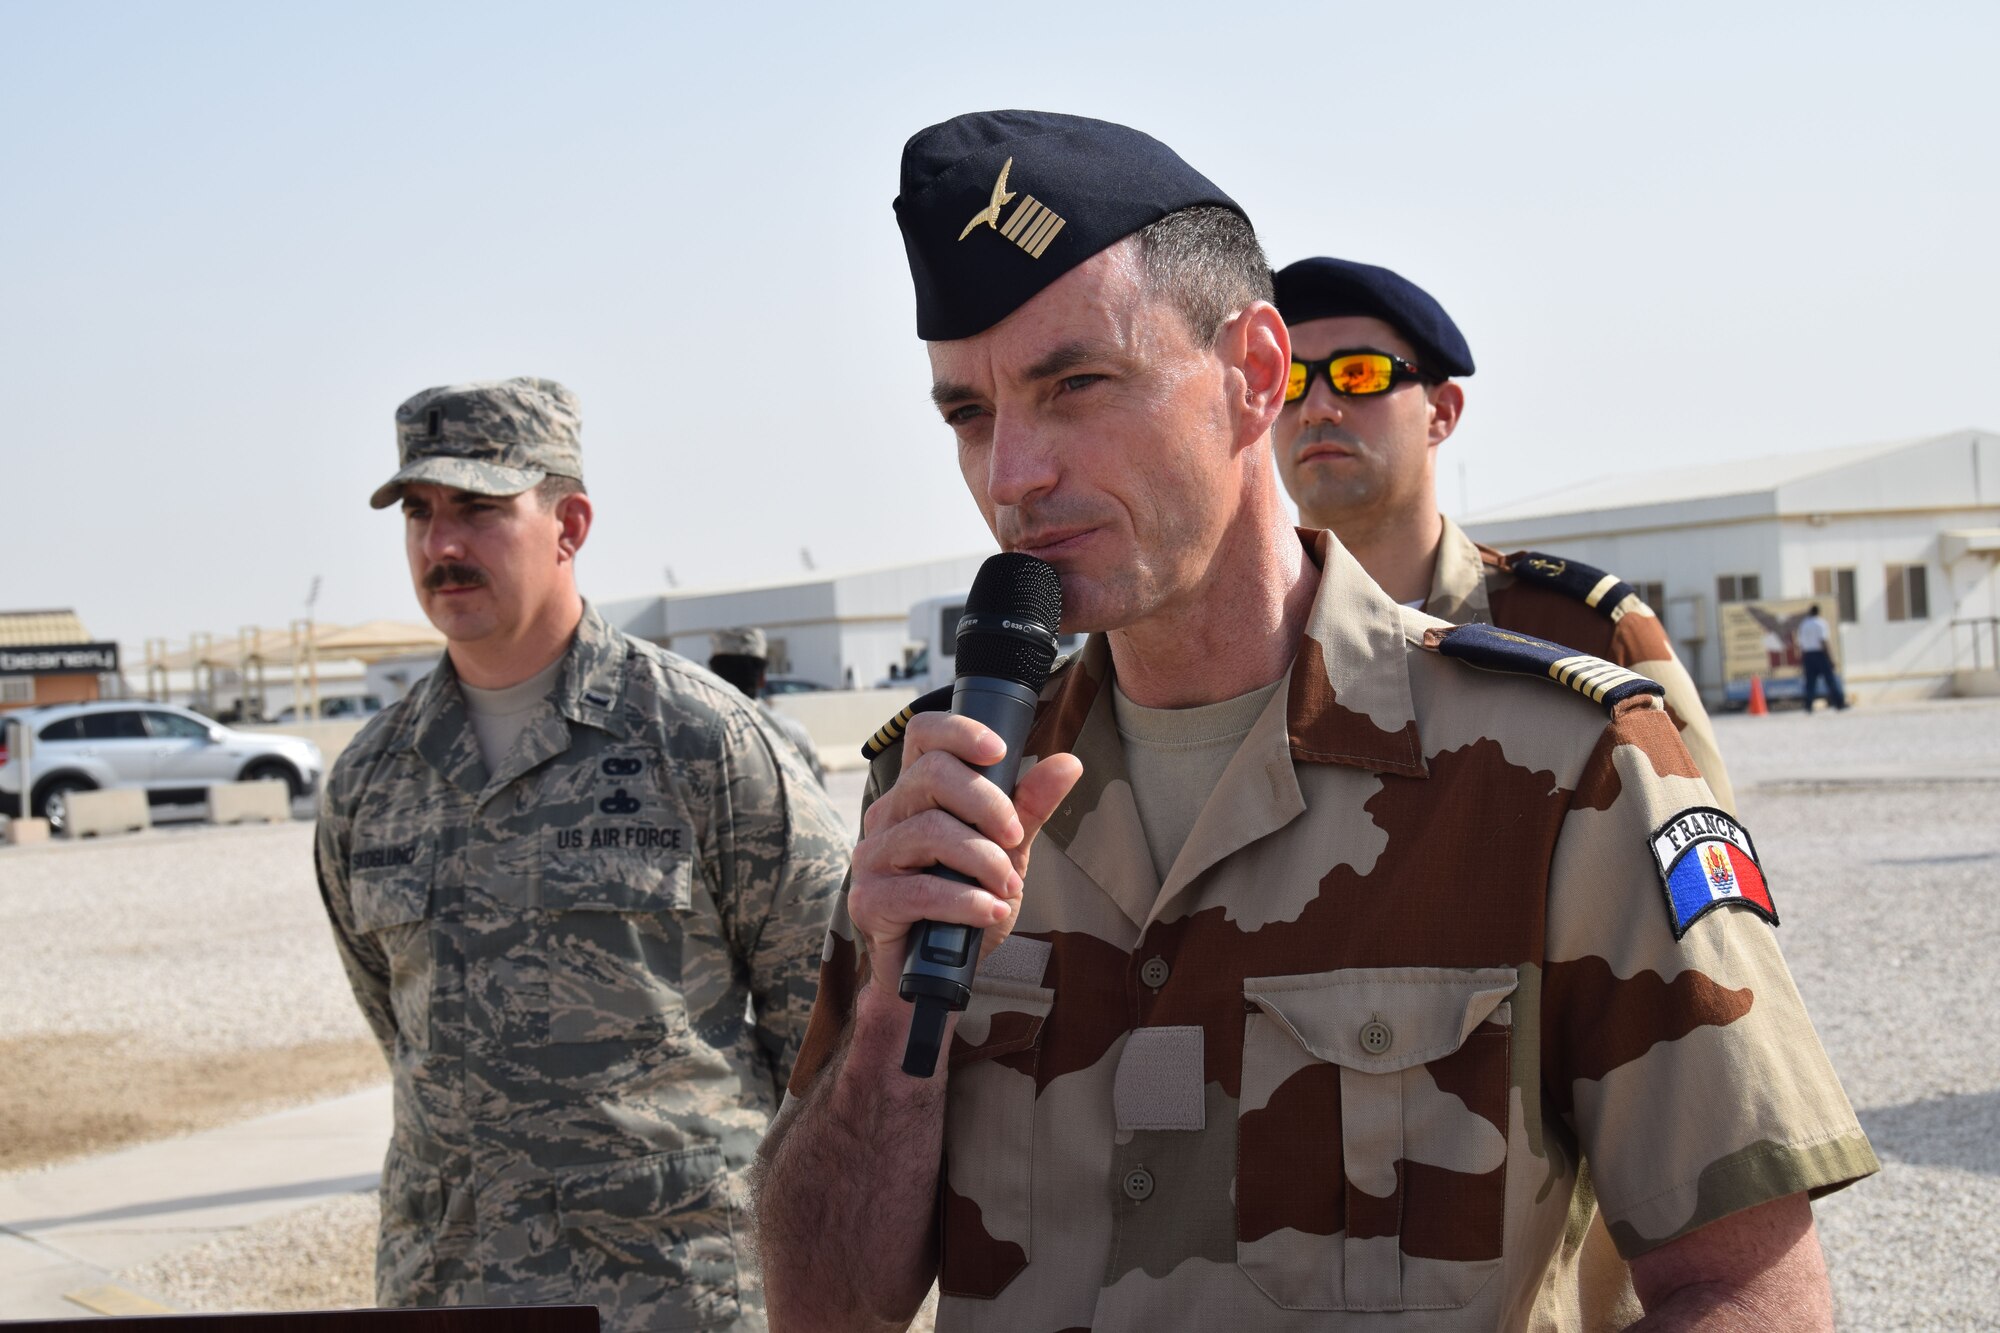 2nd Lt. Emilien Jacquot of the French Air Force narrates the history of French National Day, also known as Bastille Day, July 14, 2016, at Al Udeid Air Base, Qatar. The holiday celebrates Liberty, Equality and Fraternity in France. France is one of 20 nations supporting the air Coalition that provides decisive air and space power to combat Daesh and other terrorist organizations and ensure the stability of the Southwest Asia region. (U.S. Air Force photo/Carlos J. Treviño/Released)
